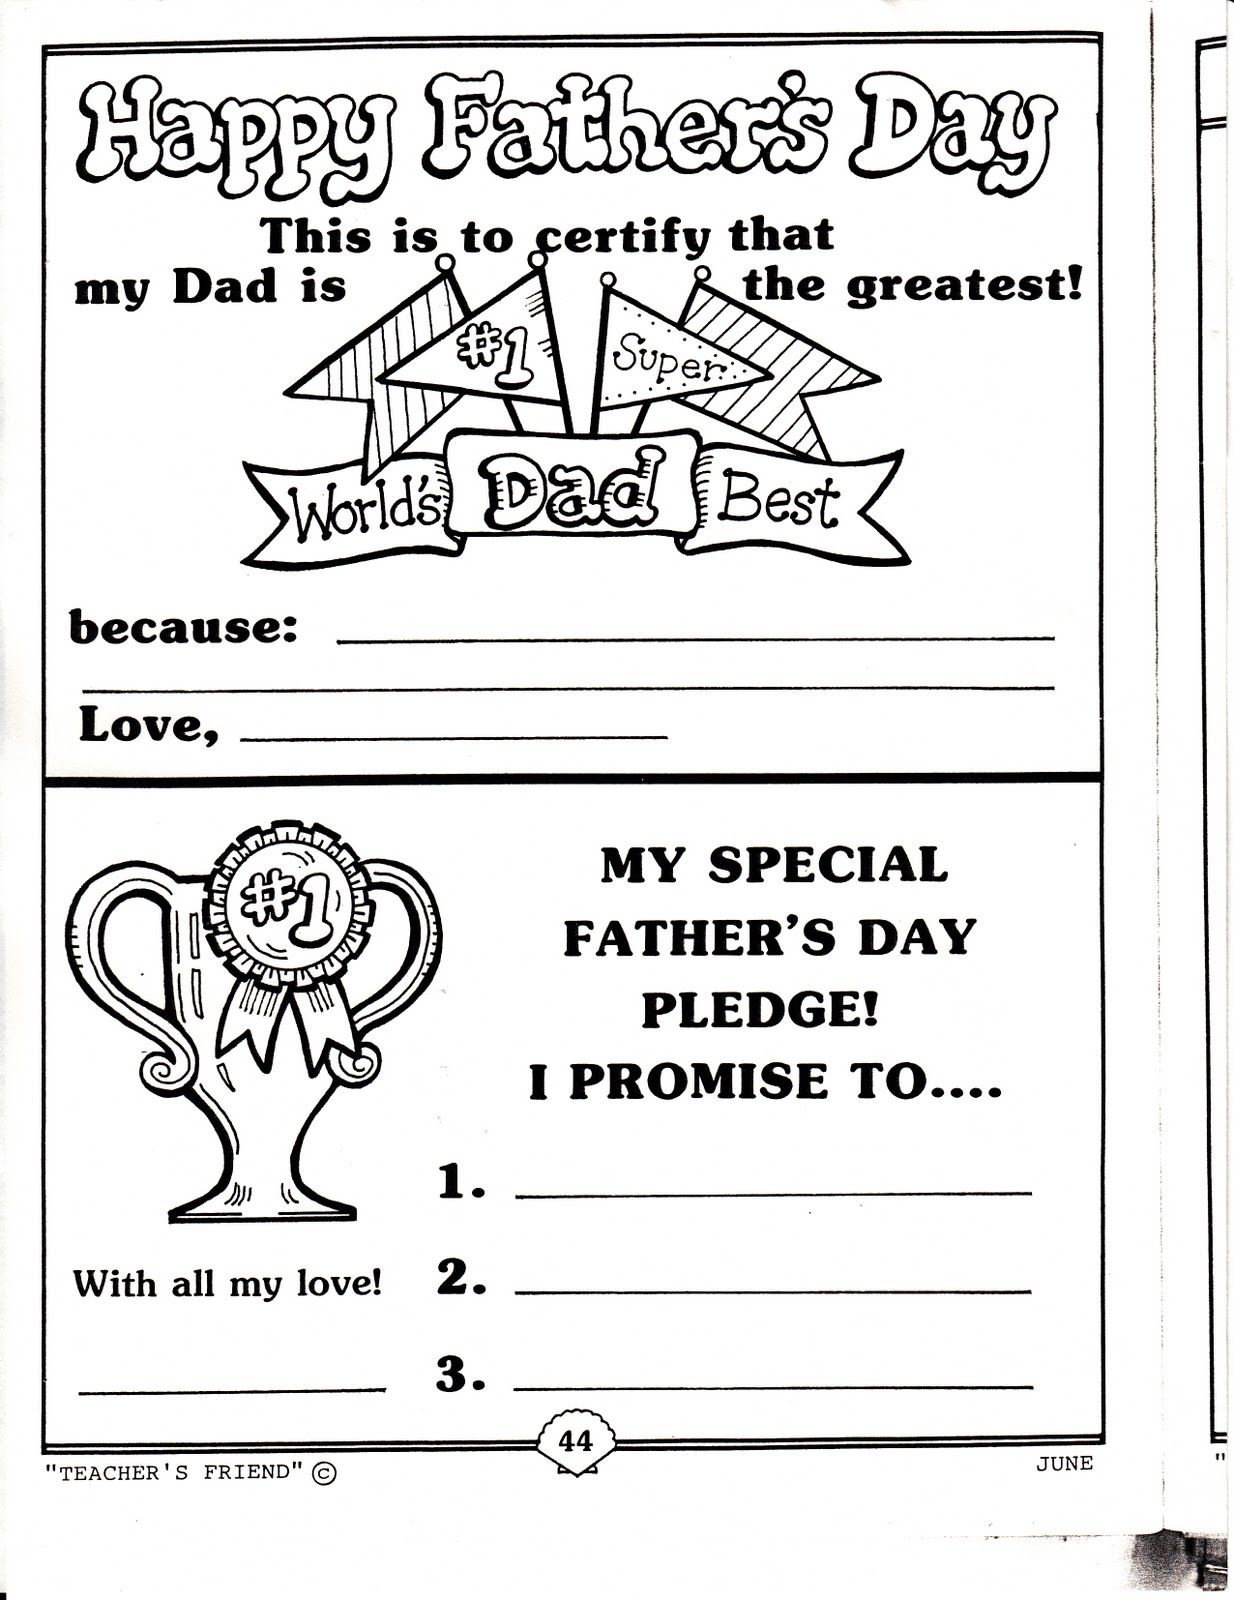 Father's Day Activities and Printables Let's Celebrate!